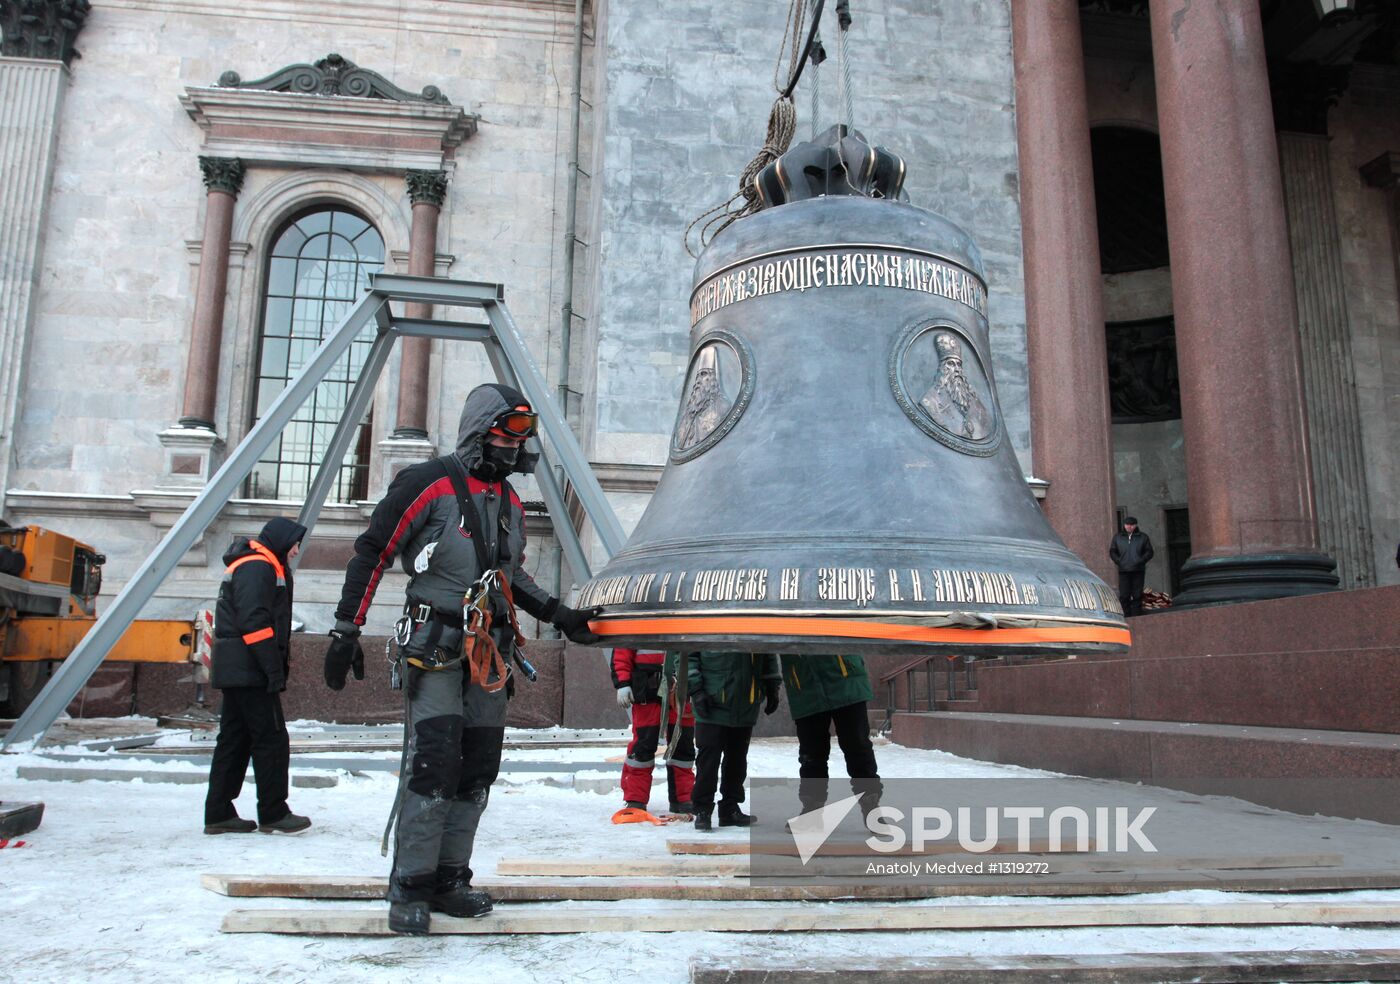 New bells for St. Isaac's Cathedral in St. Petersburg